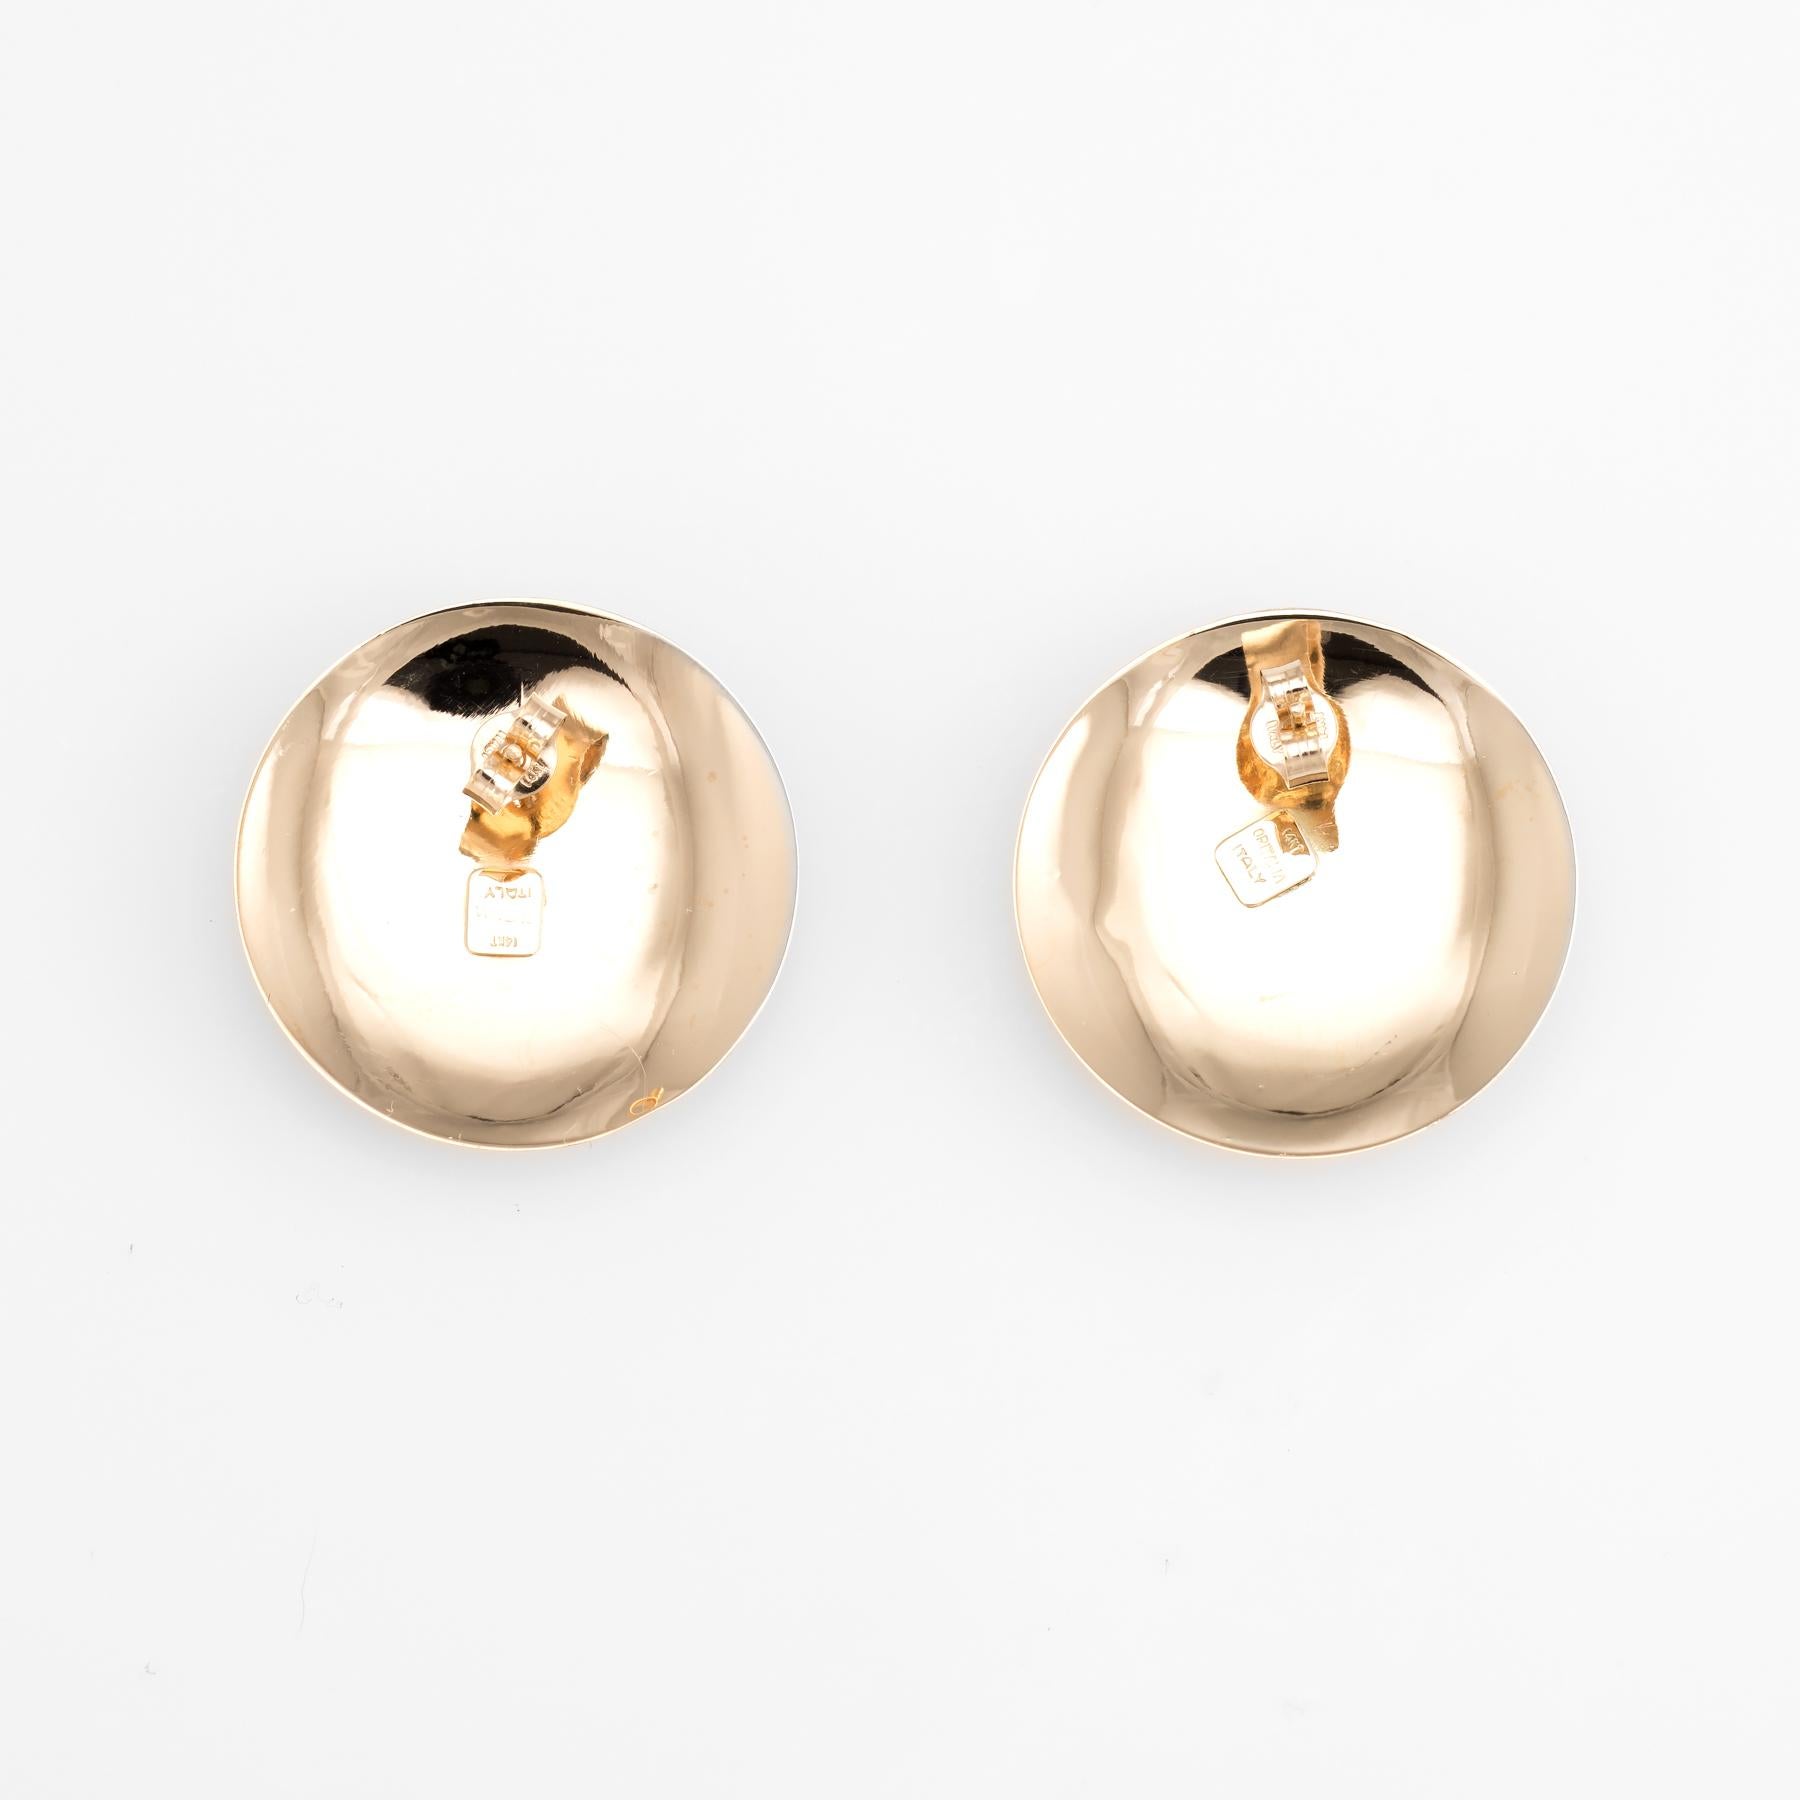 Elegant pair of vintage earrings (circa 1970s to 1980s), crafted in 14k yellow, rose & white gold. 

The round Italian made earrings feature three layers of gold (yellow, white & rose) in an attractive cascading design. A bold pair of statement